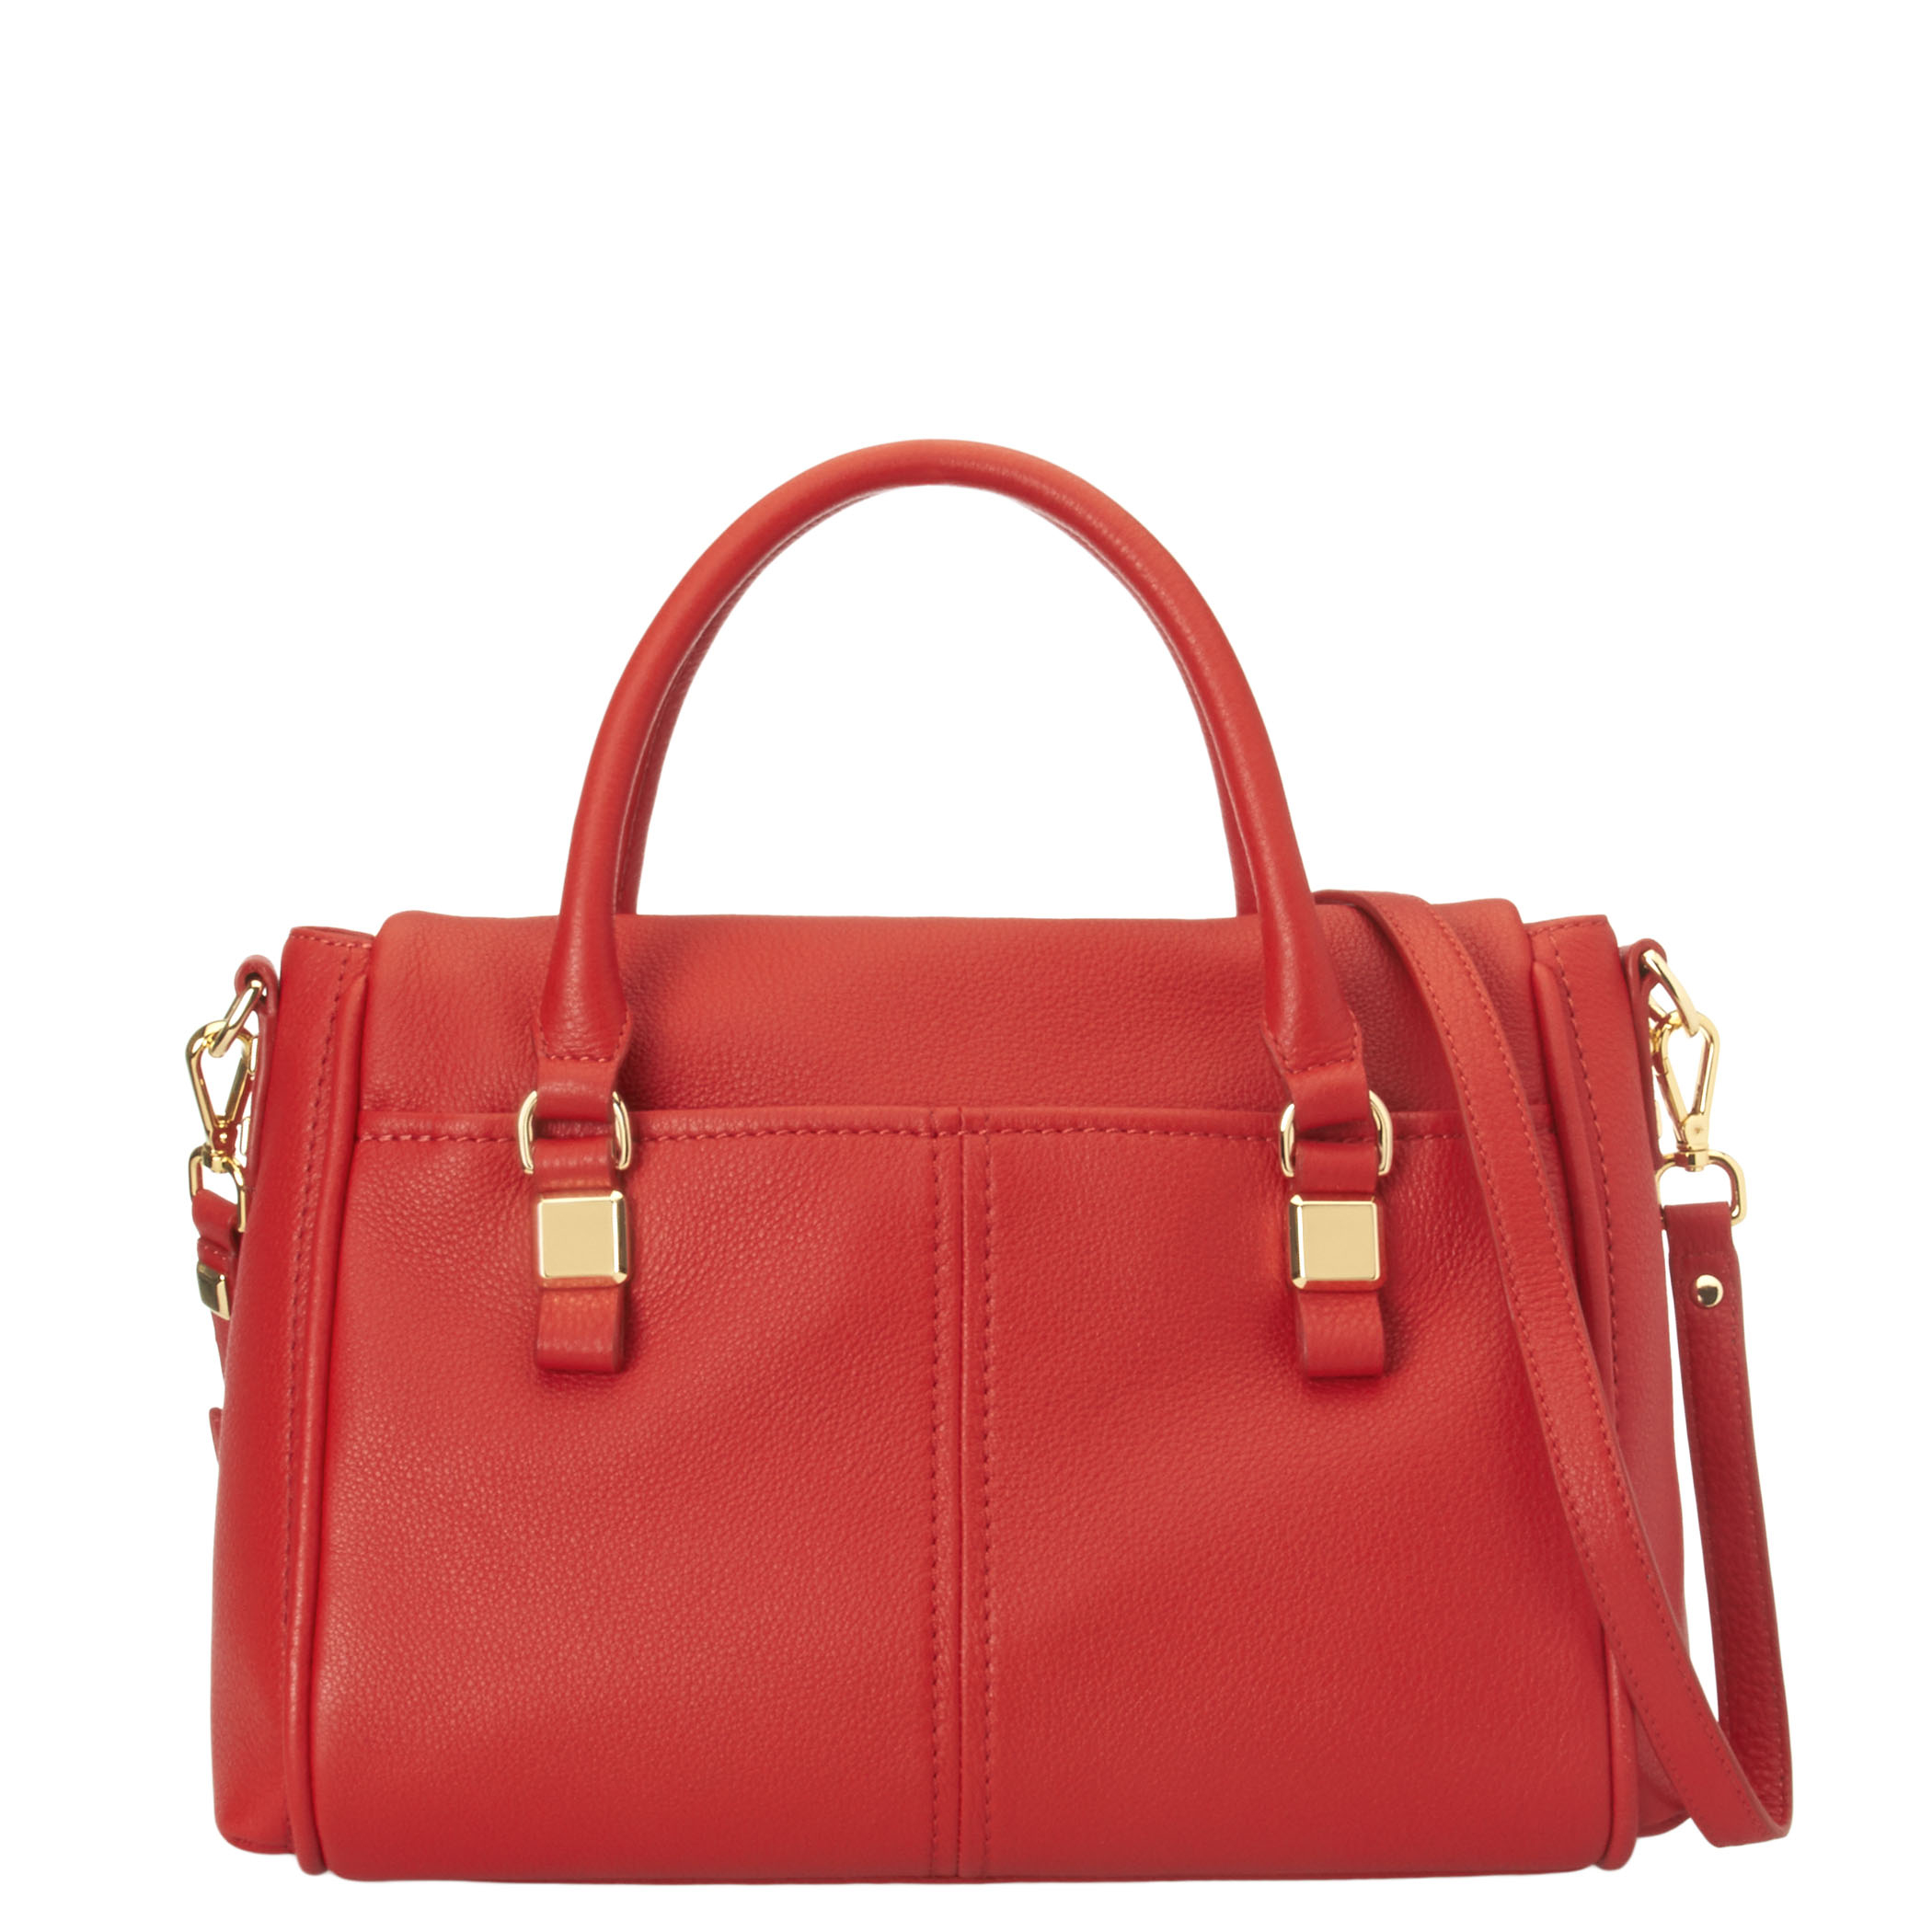 Nine west Foldover Leather Satchel in Red | Lyst